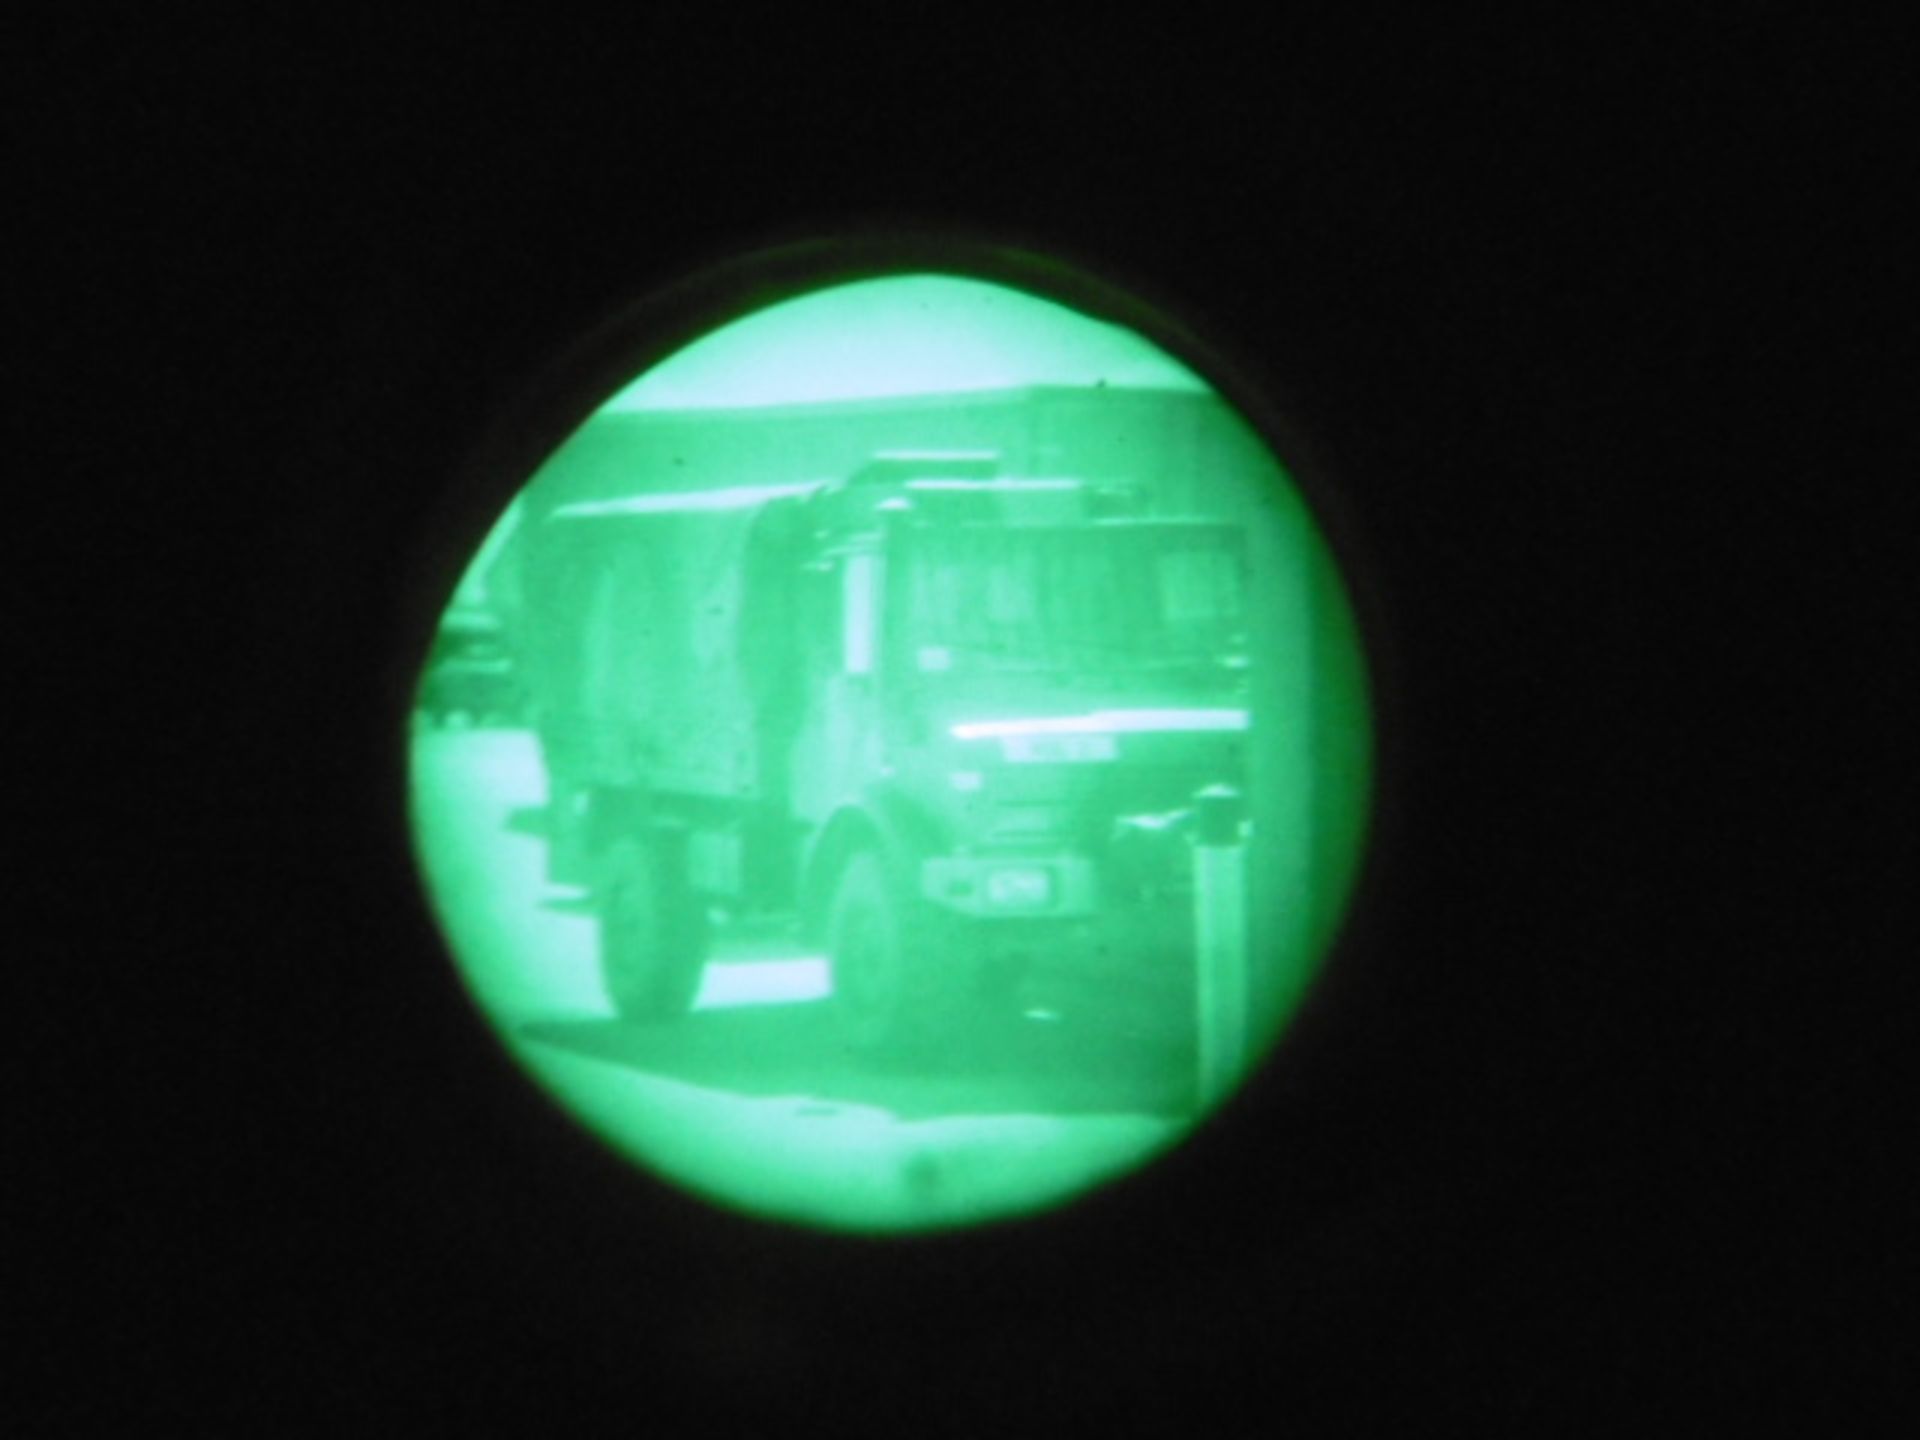 Telescope Straight Image Intensified L6A1 Scope - British Military Night Vision Pocket Scope - Image 10 of 11